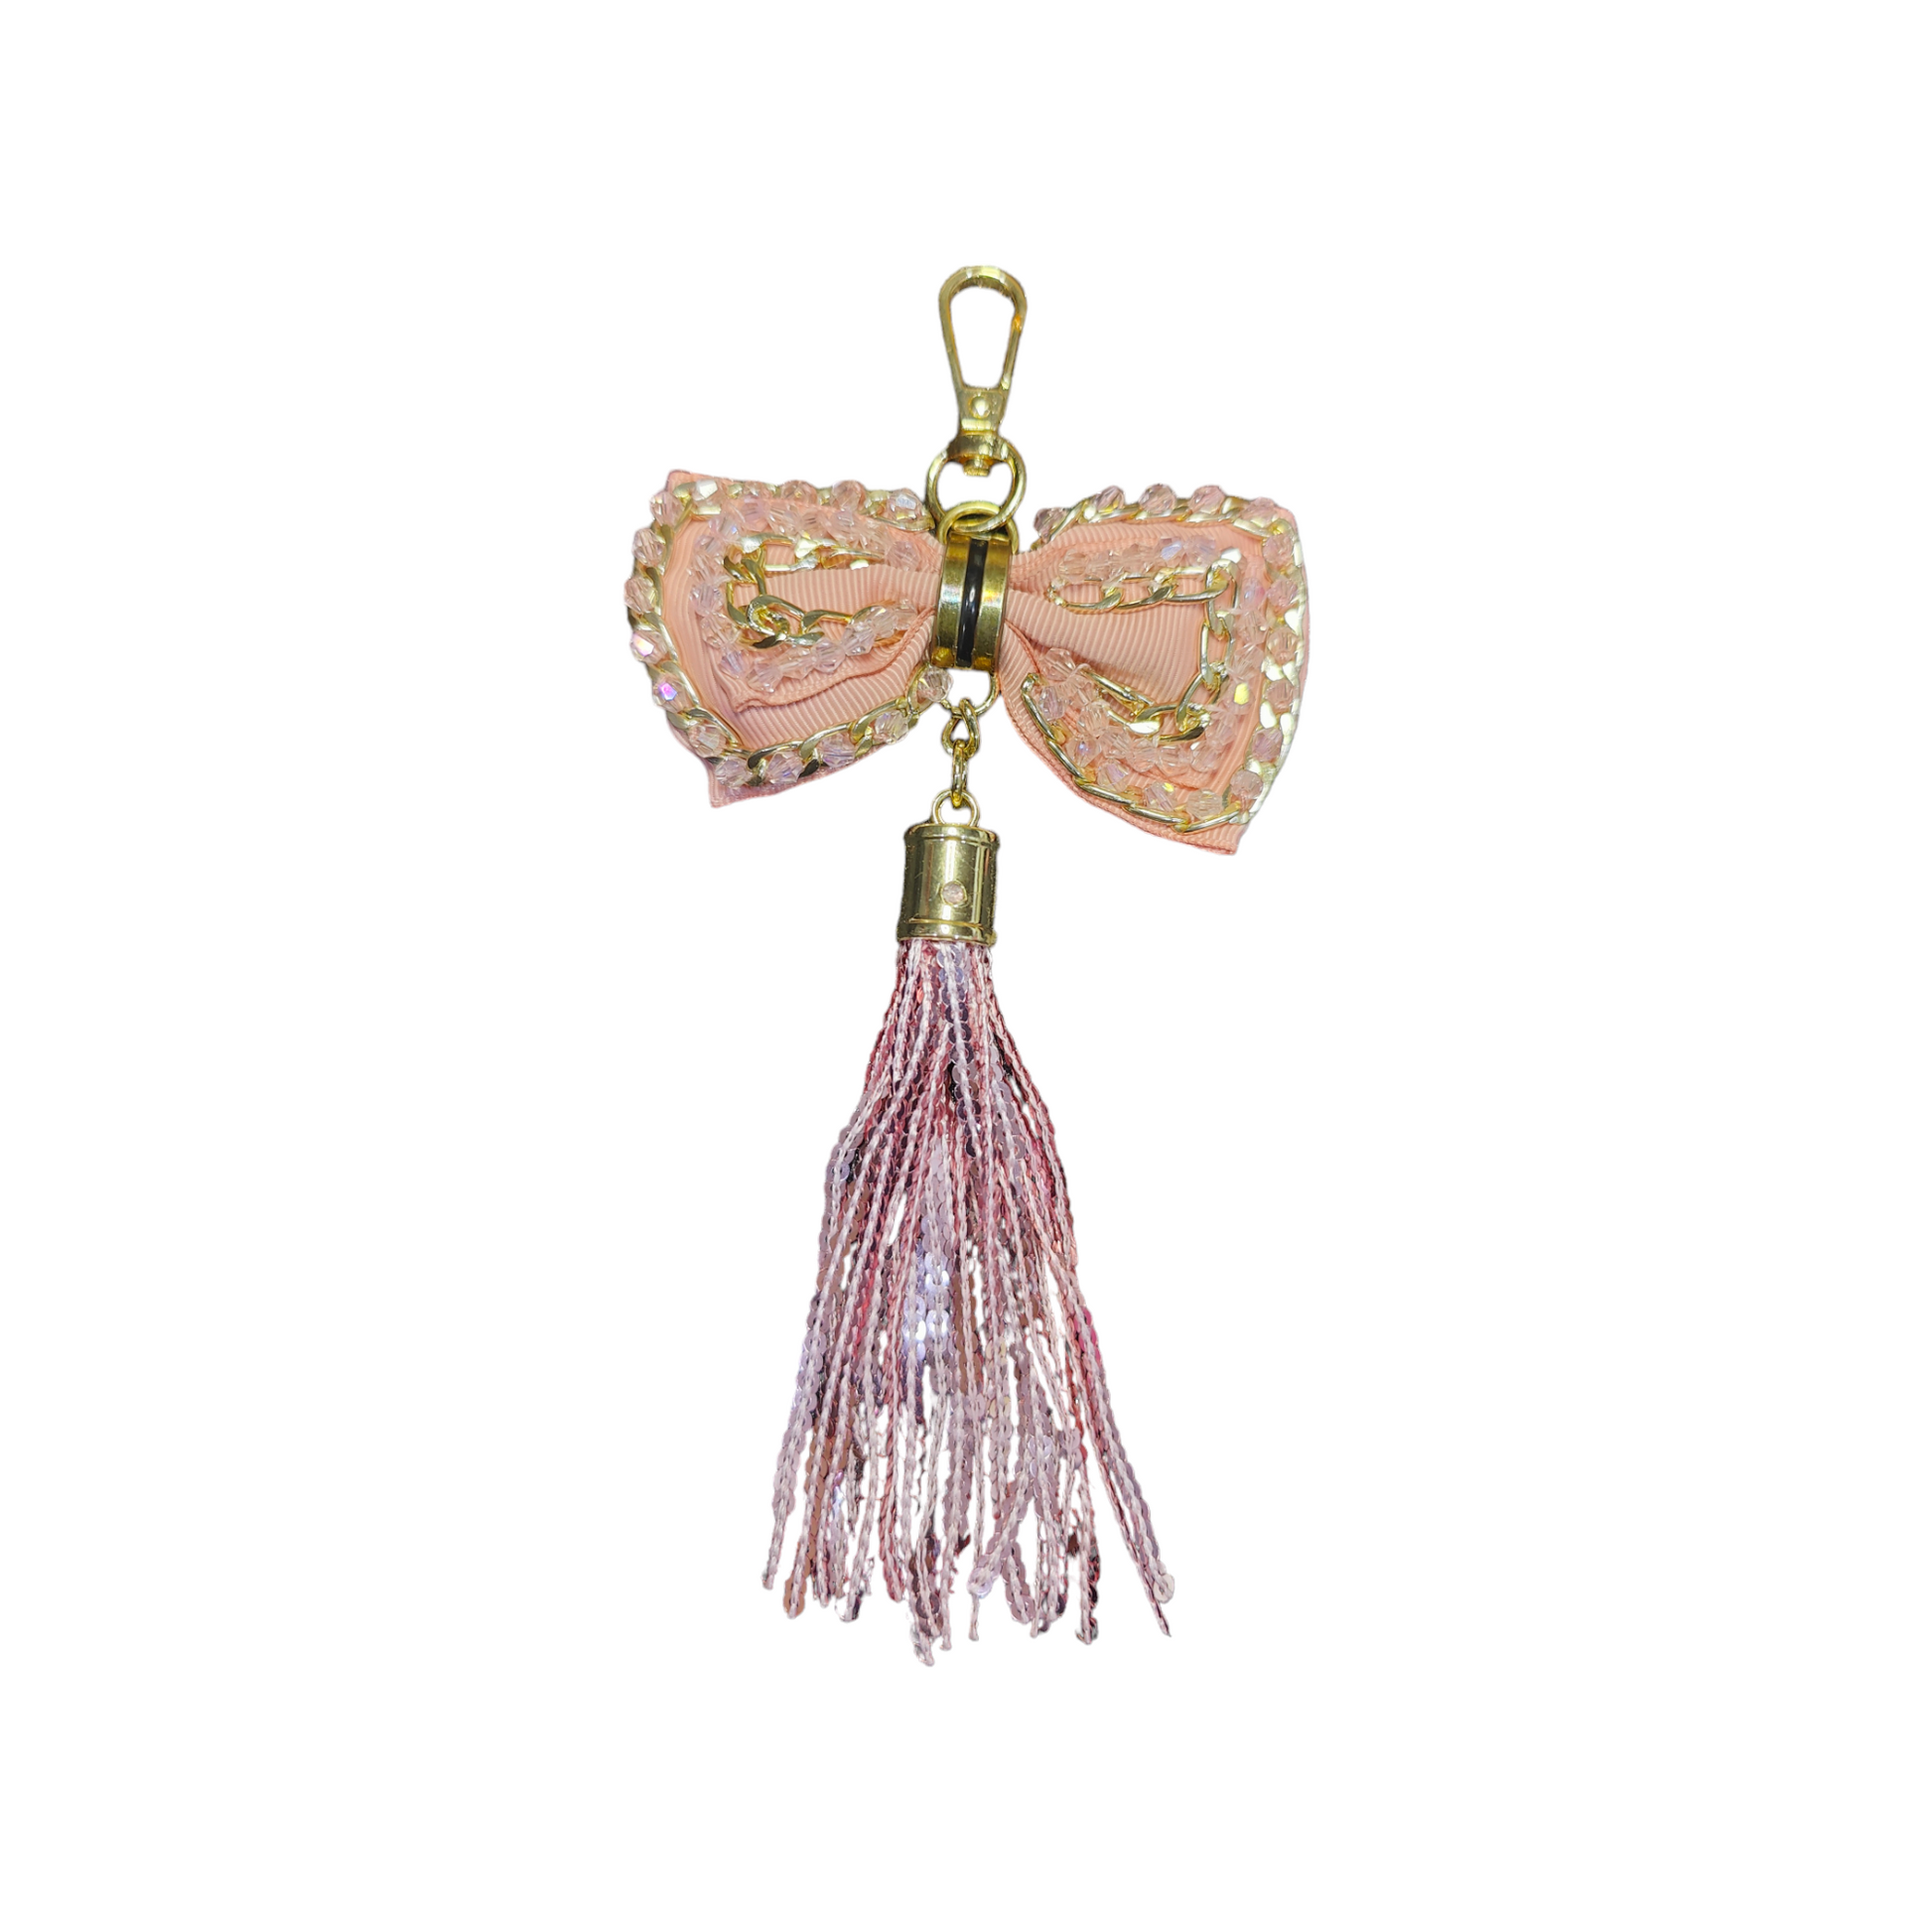 A Vdesi peach tassel bag charm with a bow that will elevate the look of your bag. 